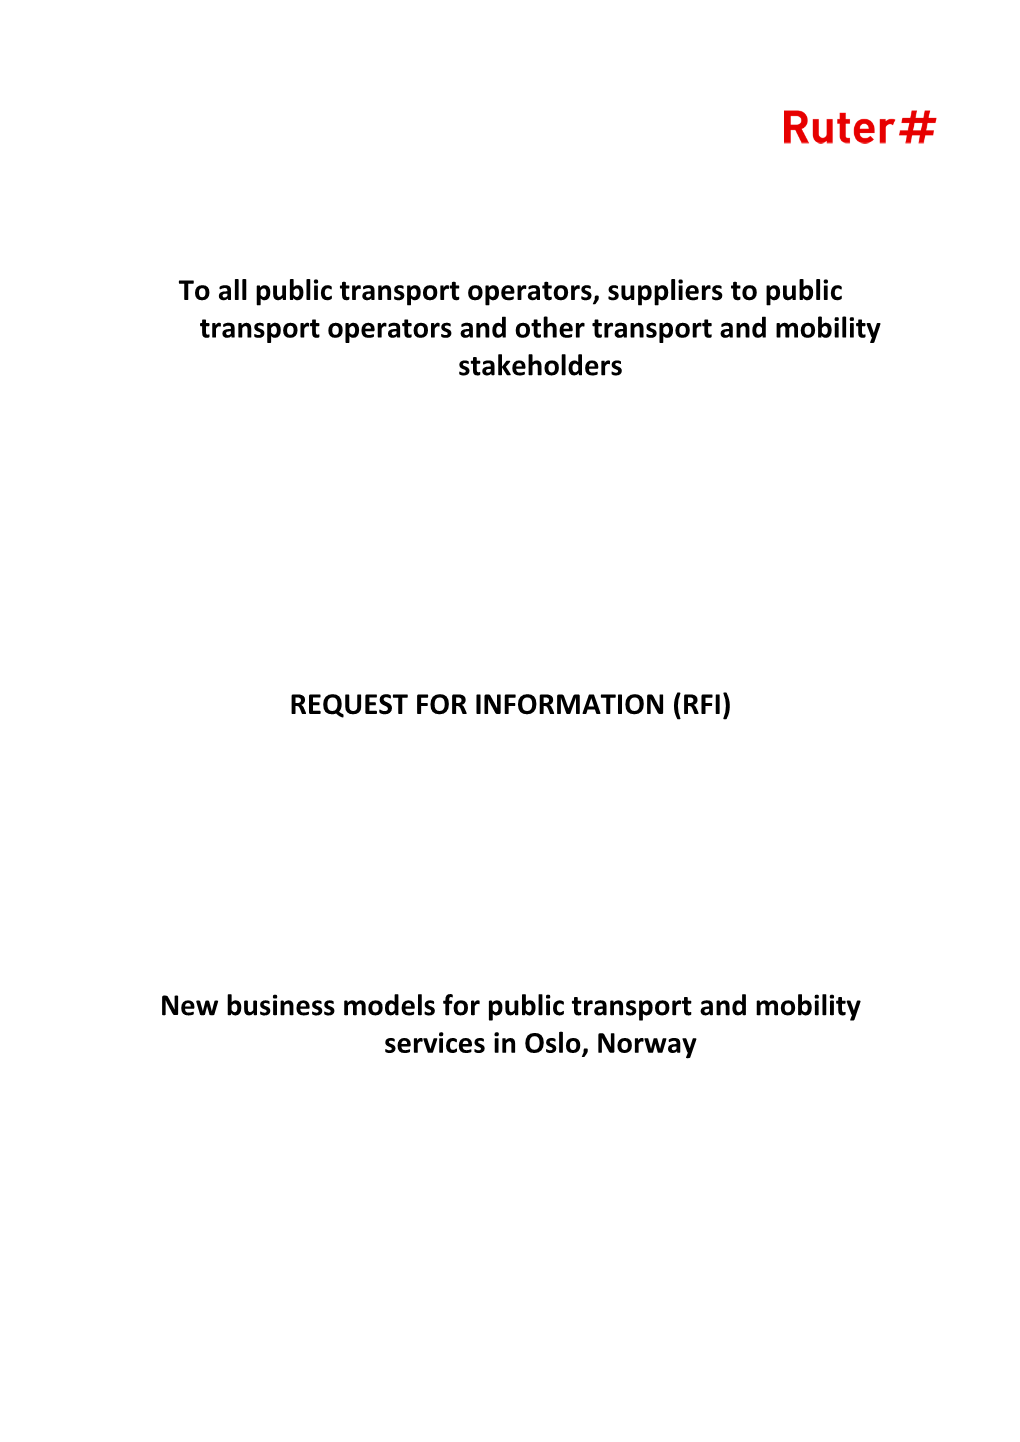 To All Public Transport Operators, Suppliers to Public Transport Operators and Other Transport and Mobility Stakeholders